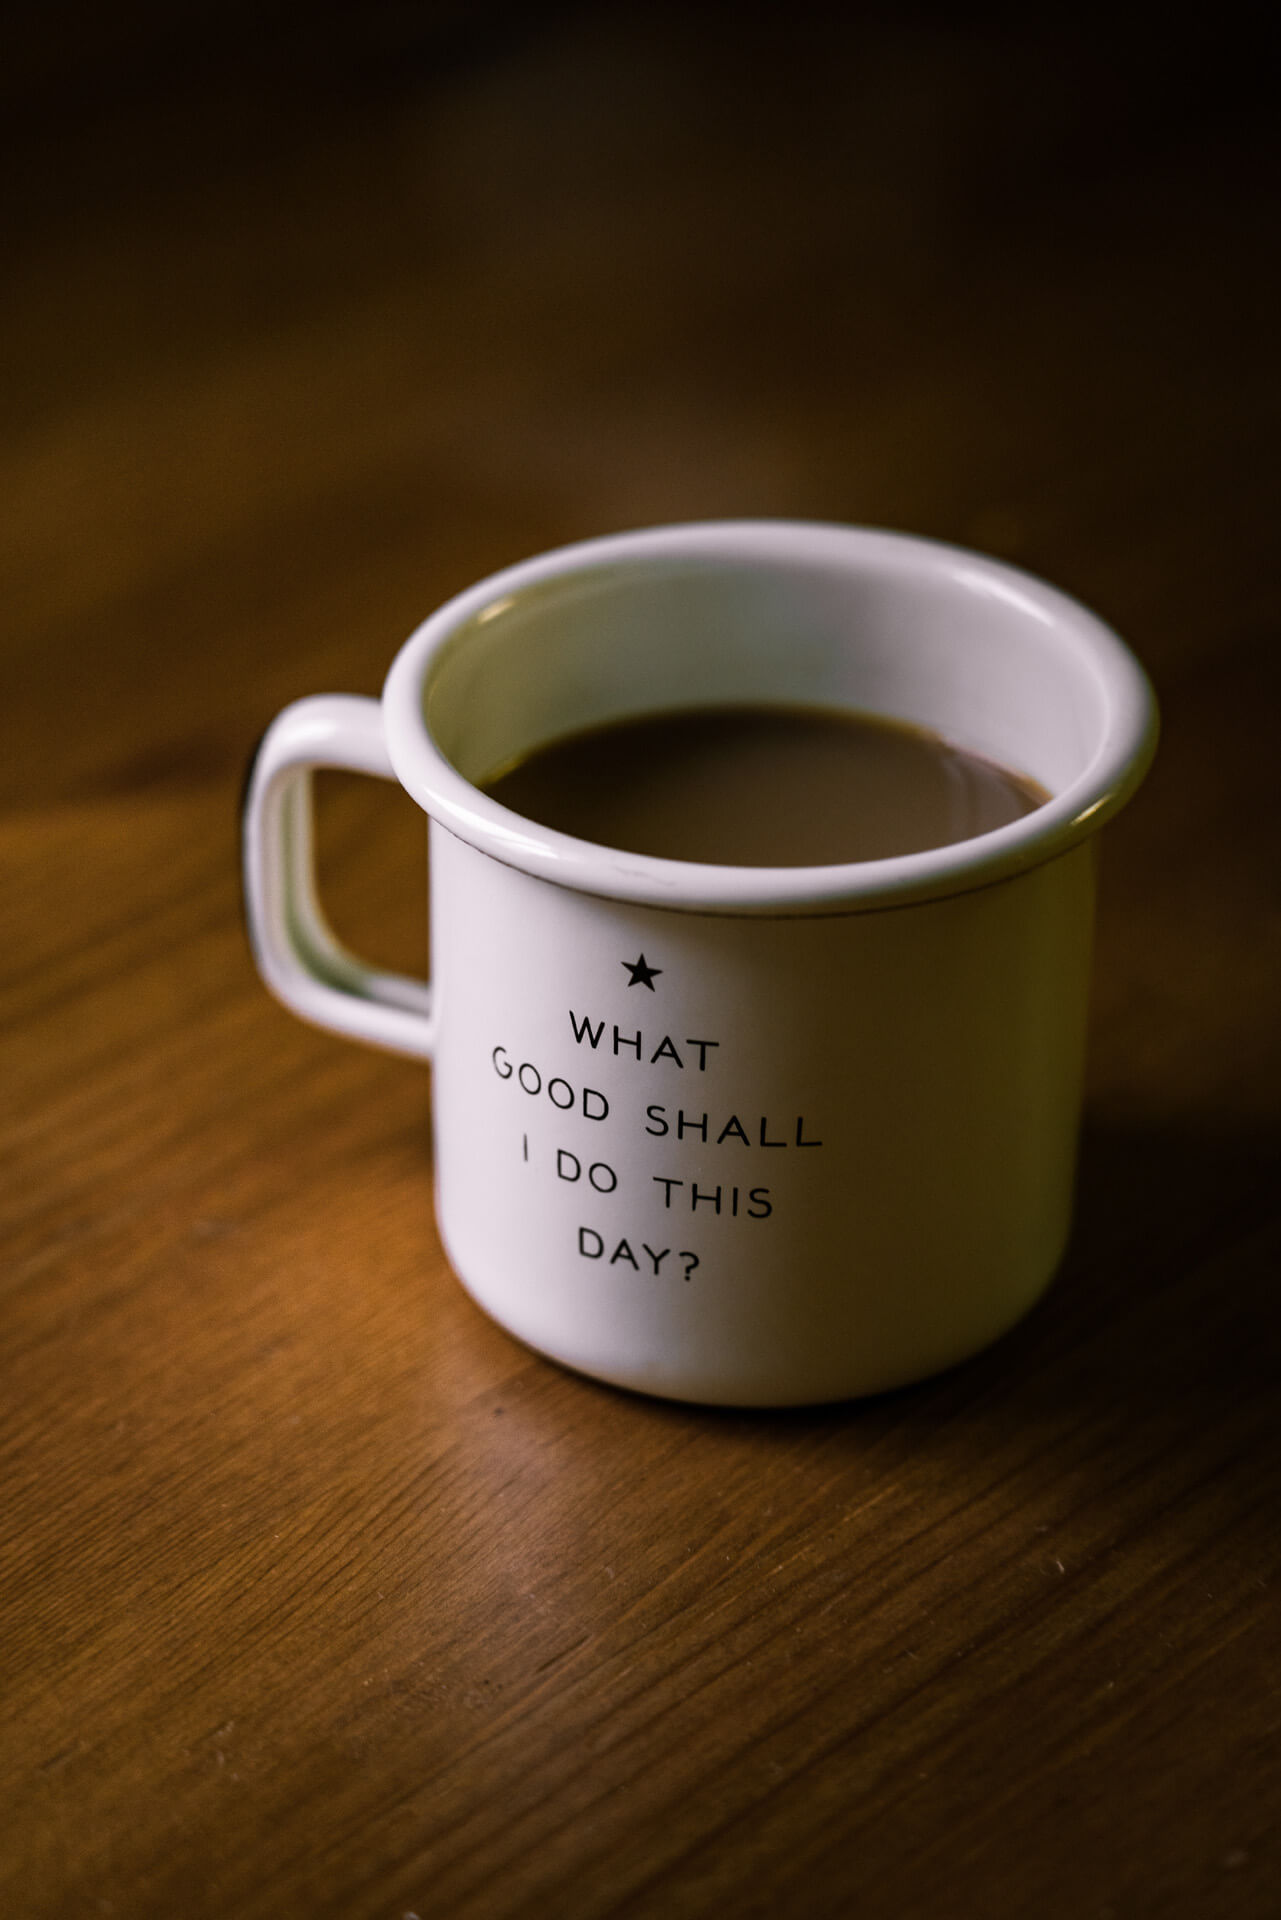 A coffee cup that says "What good shall I do this day?"